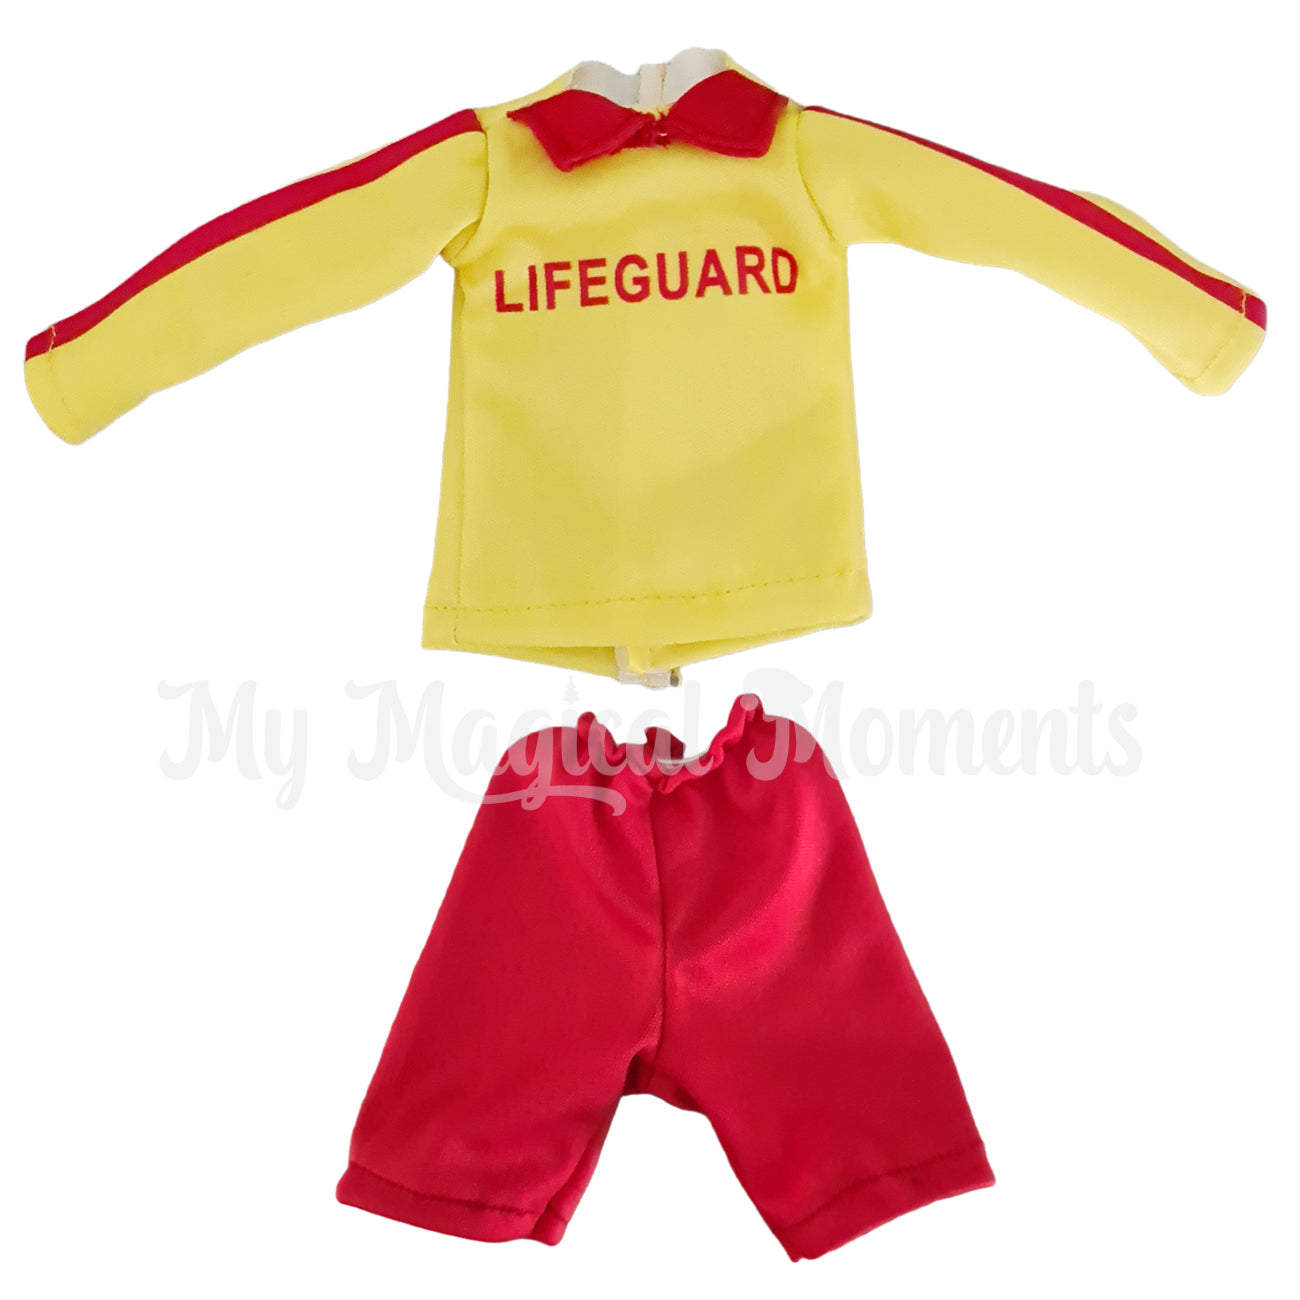 Elf life saver outfit with rash vest and shorts